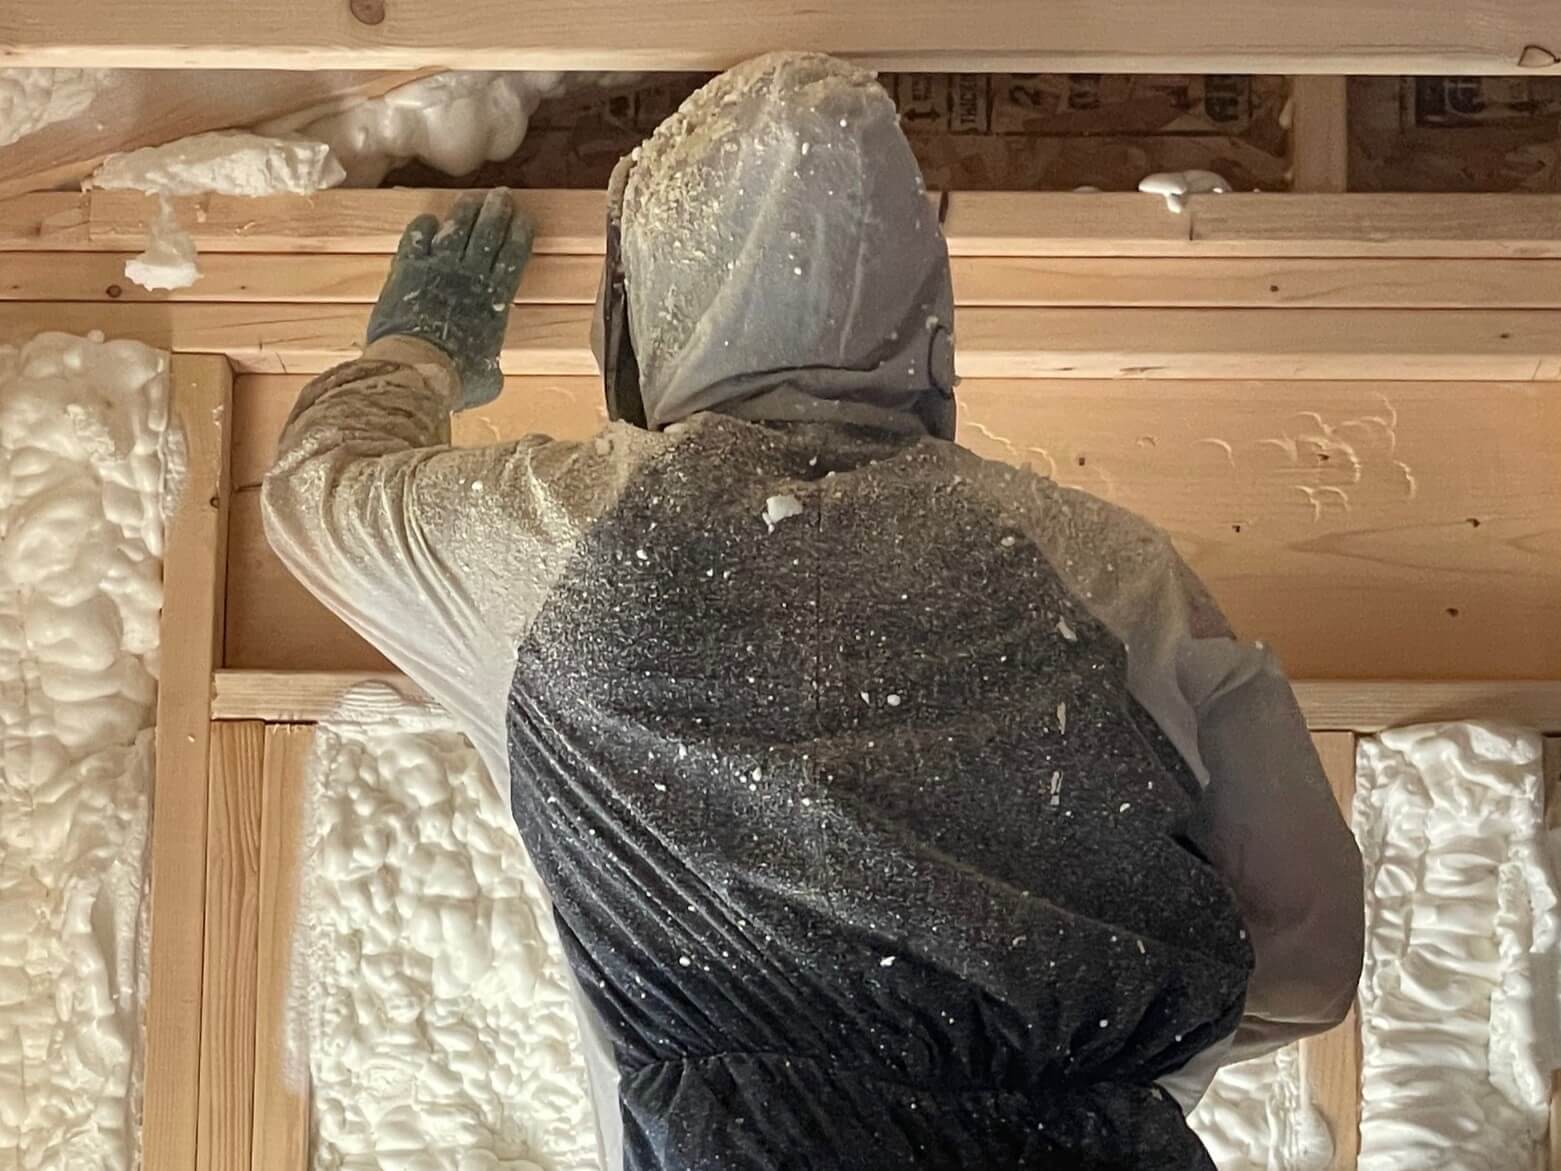 A spray foam insulation installer wearing personal protective equipment while spraying open cell foam.